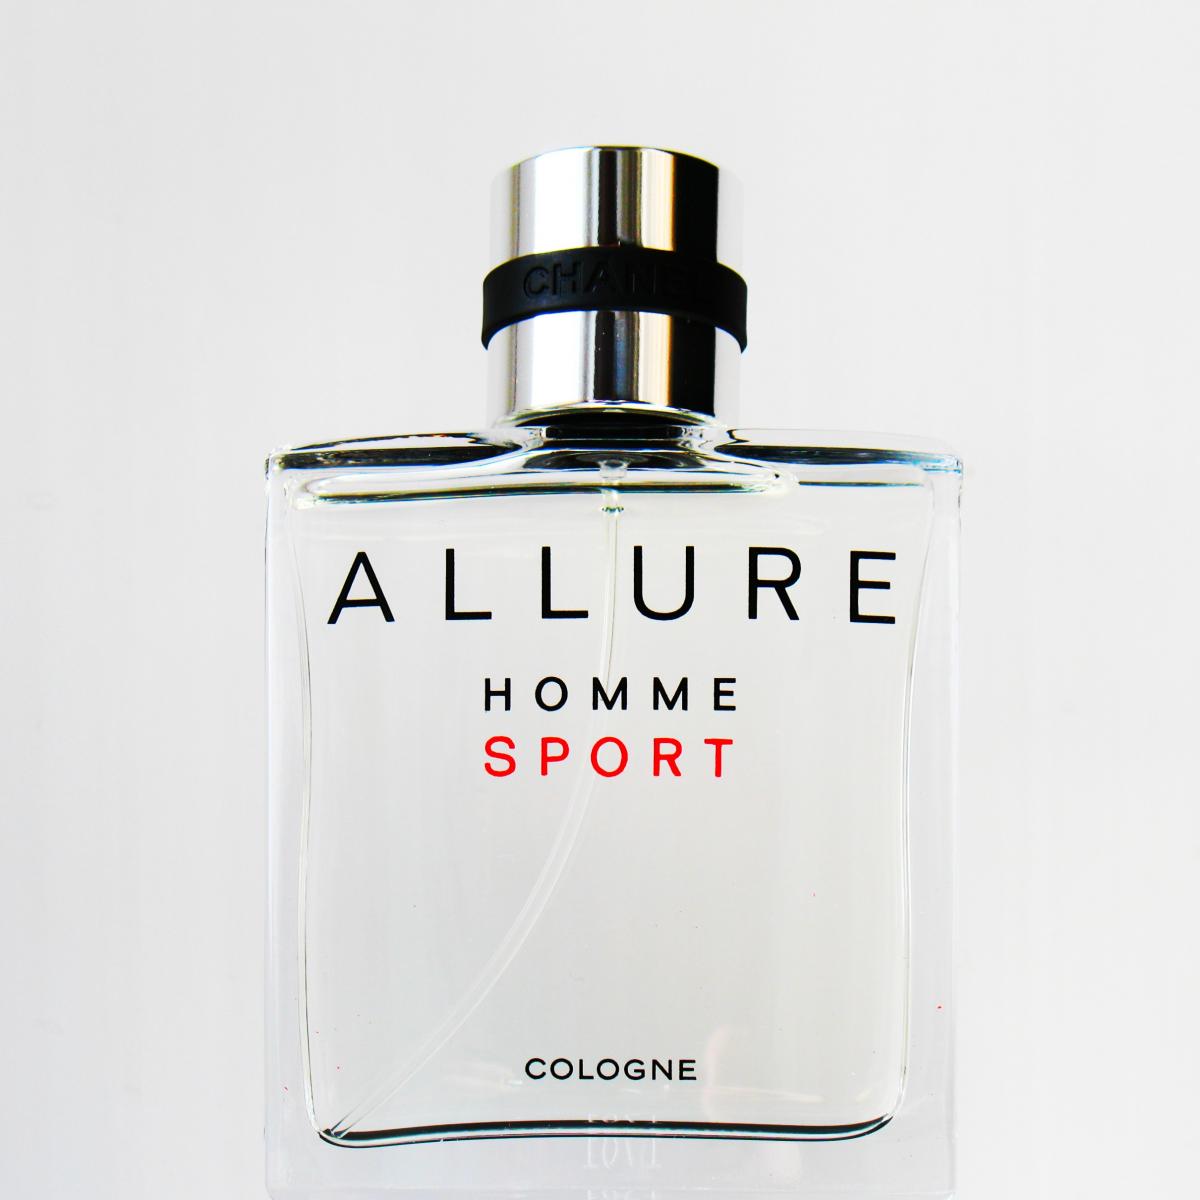 Chanel homme Sport Cologne. Chanel Allure homme Sport Cologne. Chanel Allure homme Sport Cologne 3*20. Chanel Allure Sport Cologne 50ml. Allure sport cologne